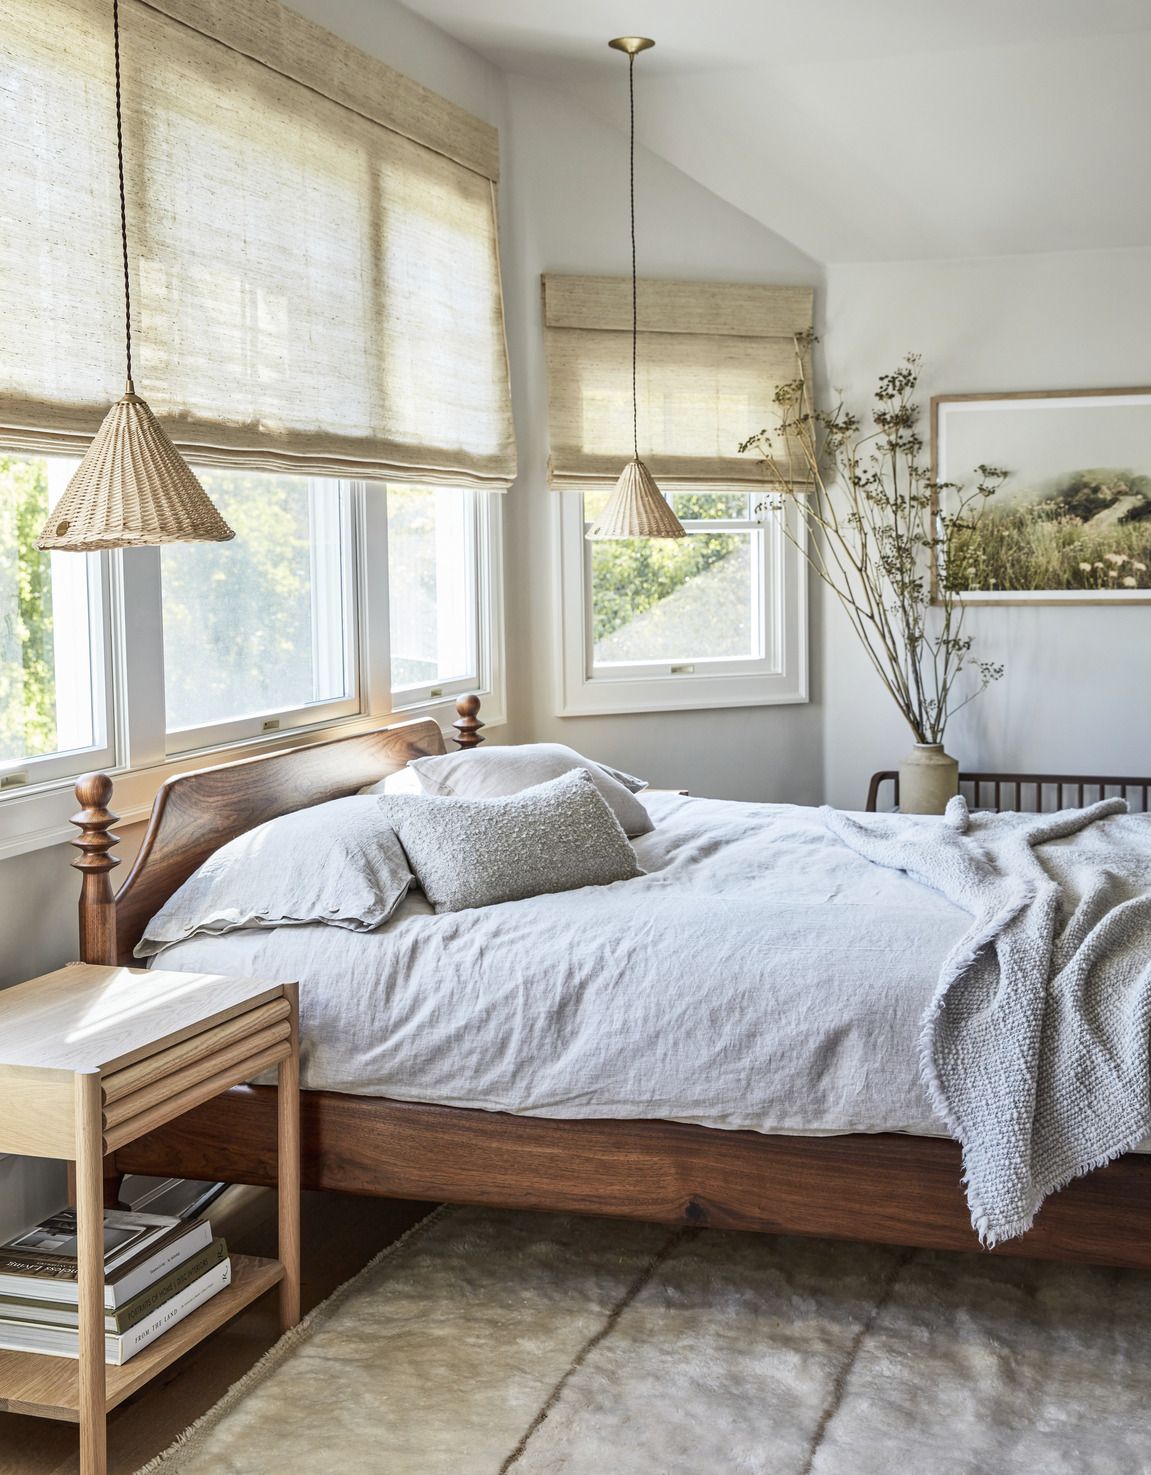 Cozy Ideas to Make Your Guest Room Feel Like Home